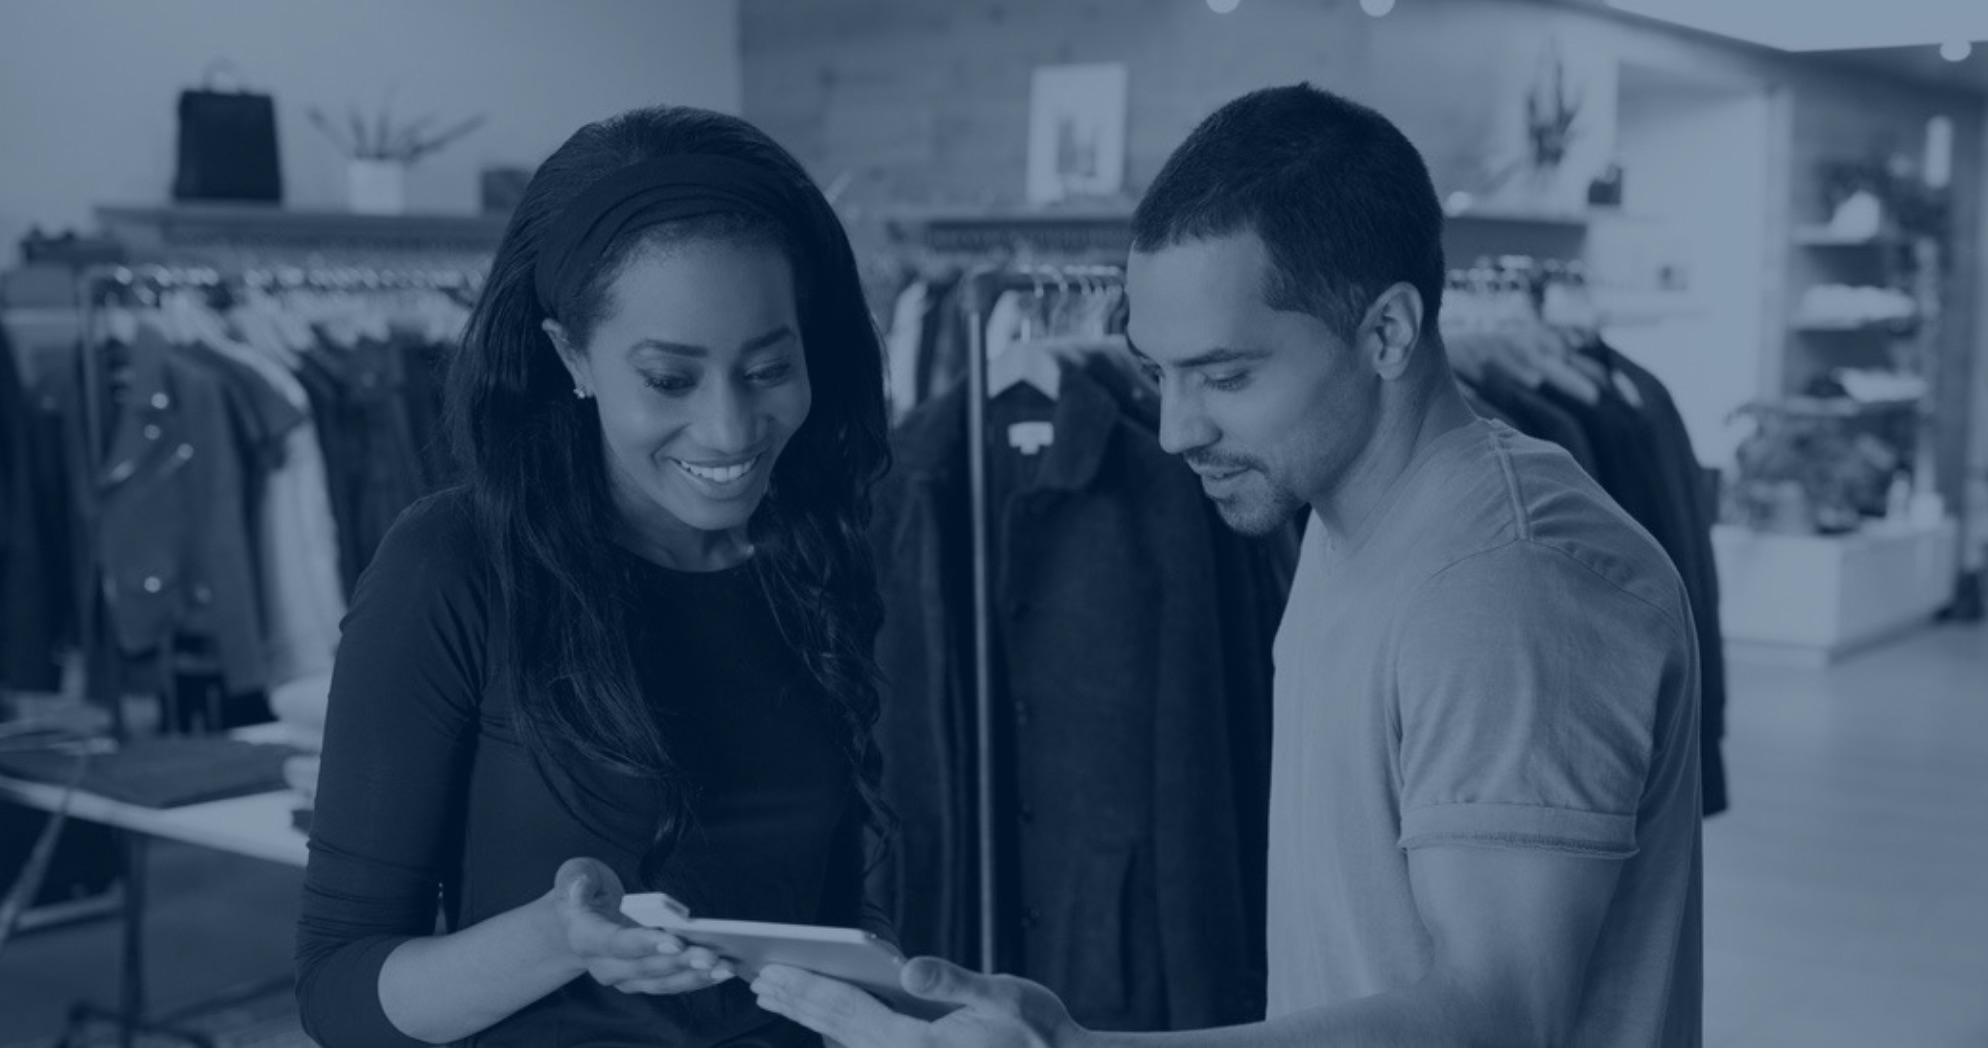 Retail innovation employee engagement and productivity